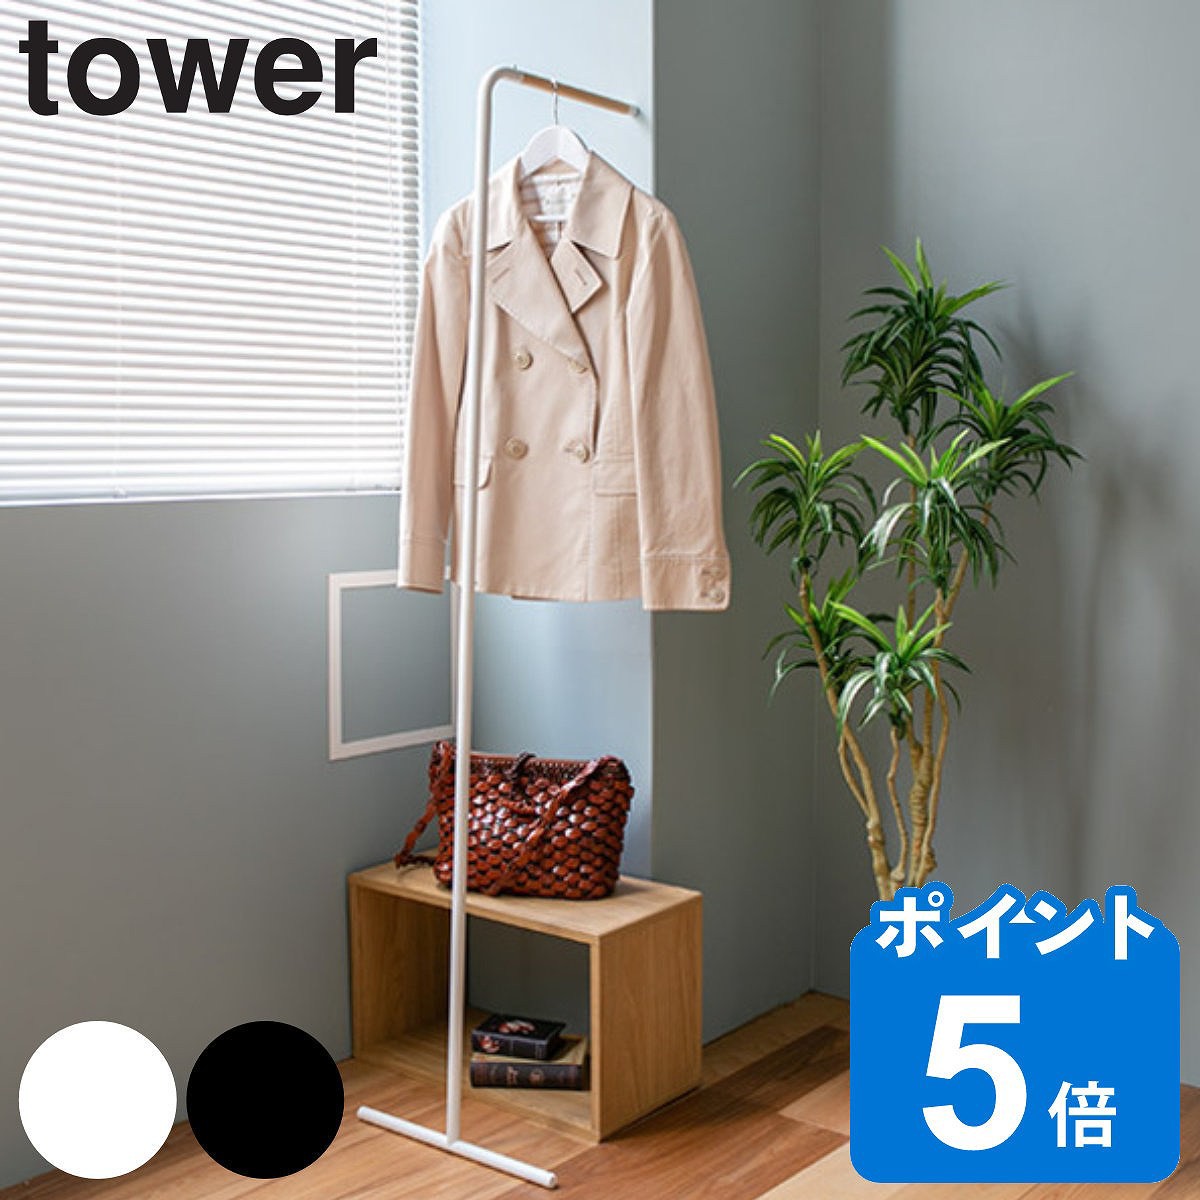 R tower XR[gnK[ ^[